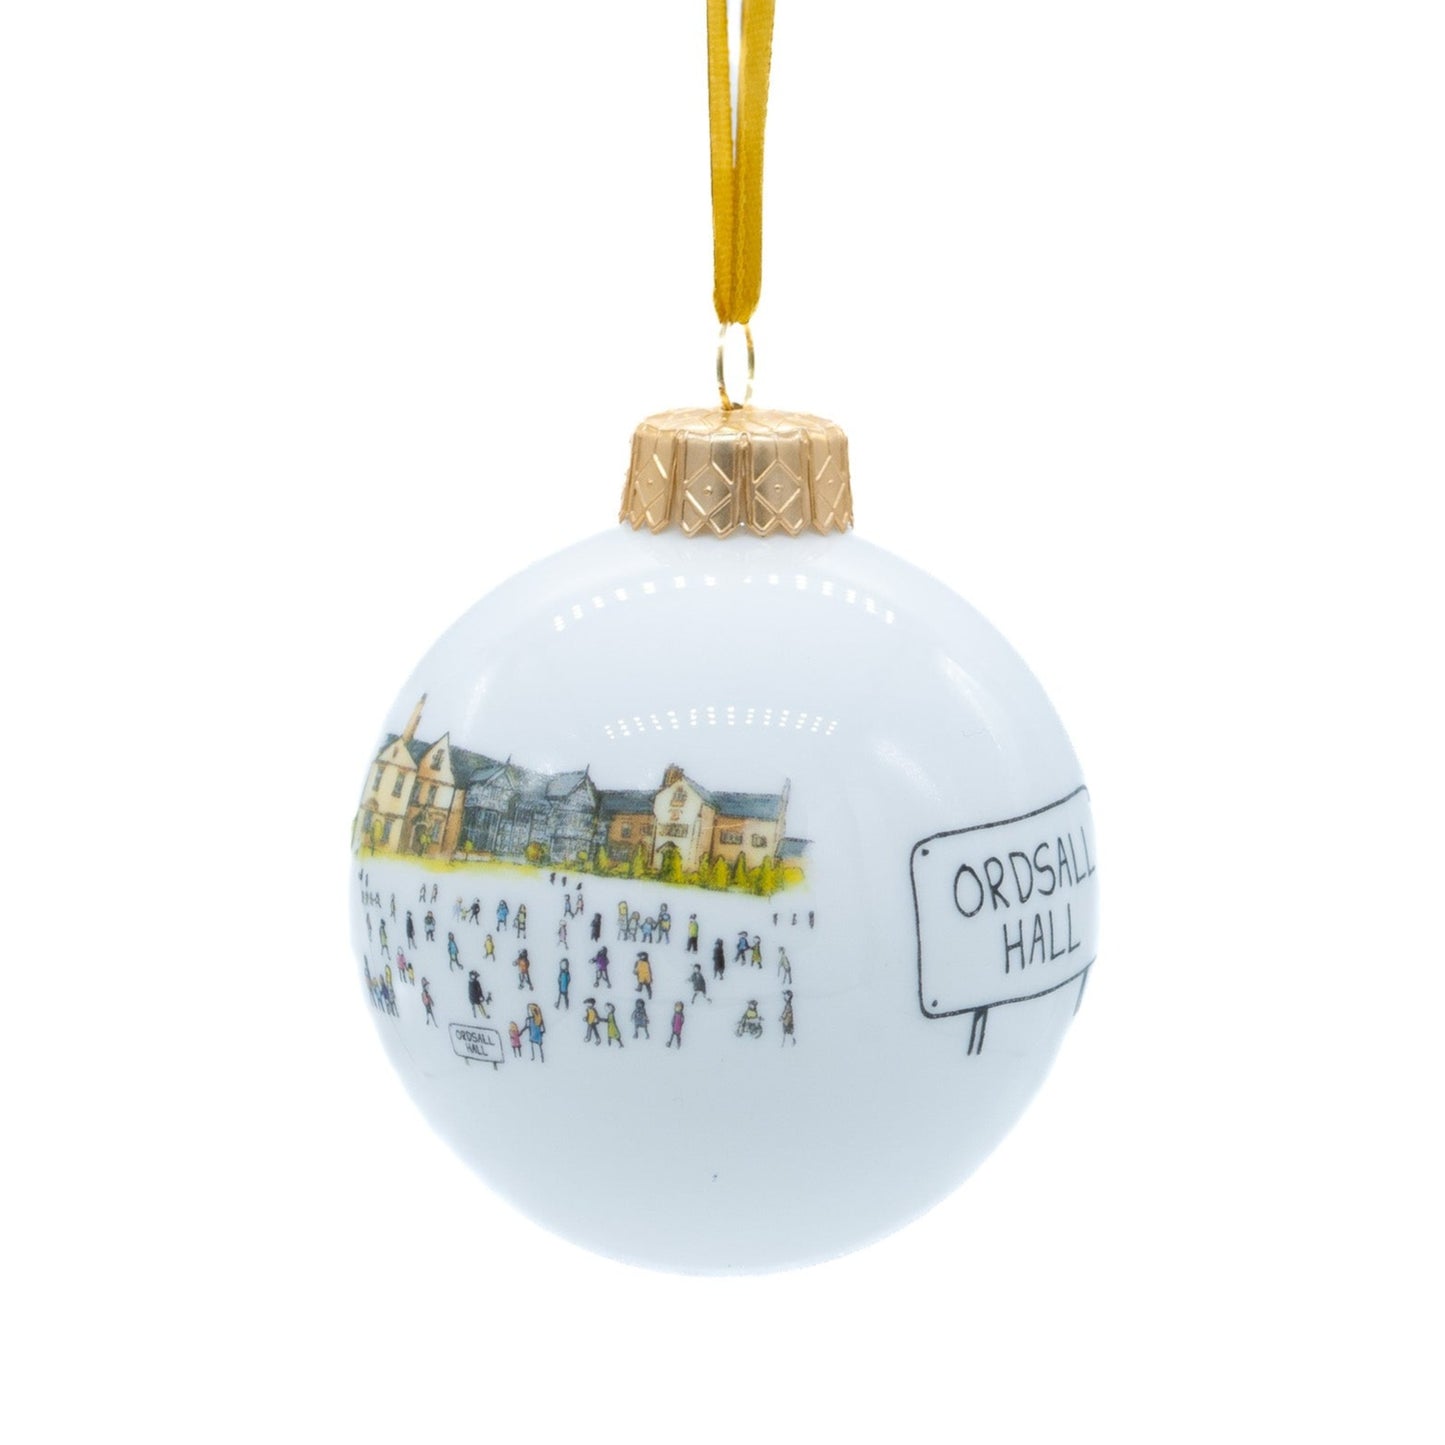 Ordsall Hall Ceramic Bauble by Foley Pottery